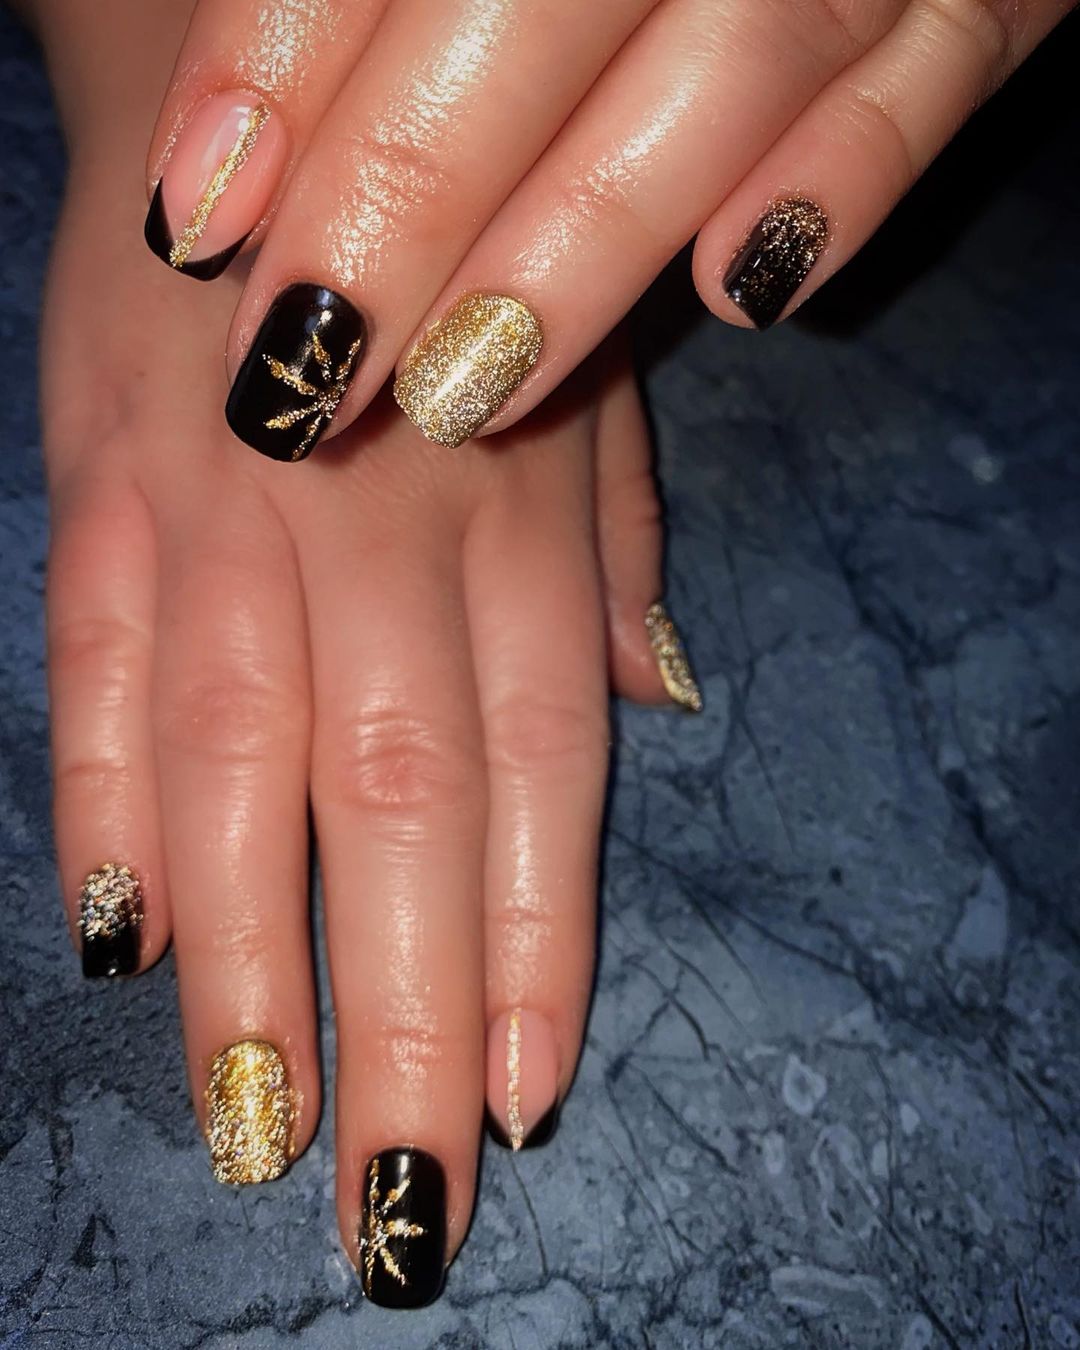 40+ gorgeous black and gold nails designs you should make this year.